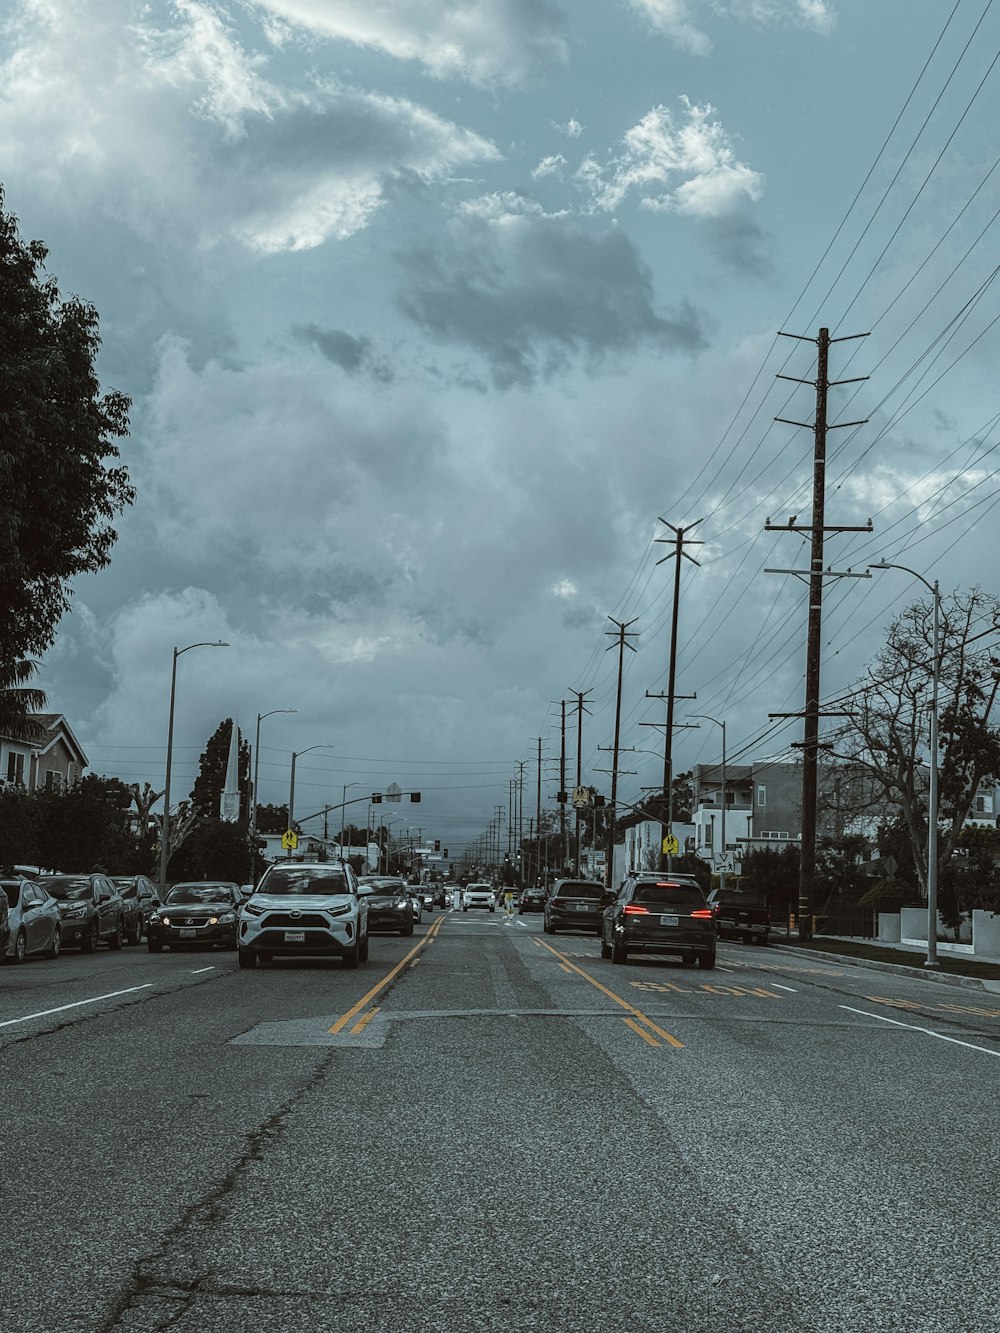 a street filled with lots of traffic under a cloudy sky